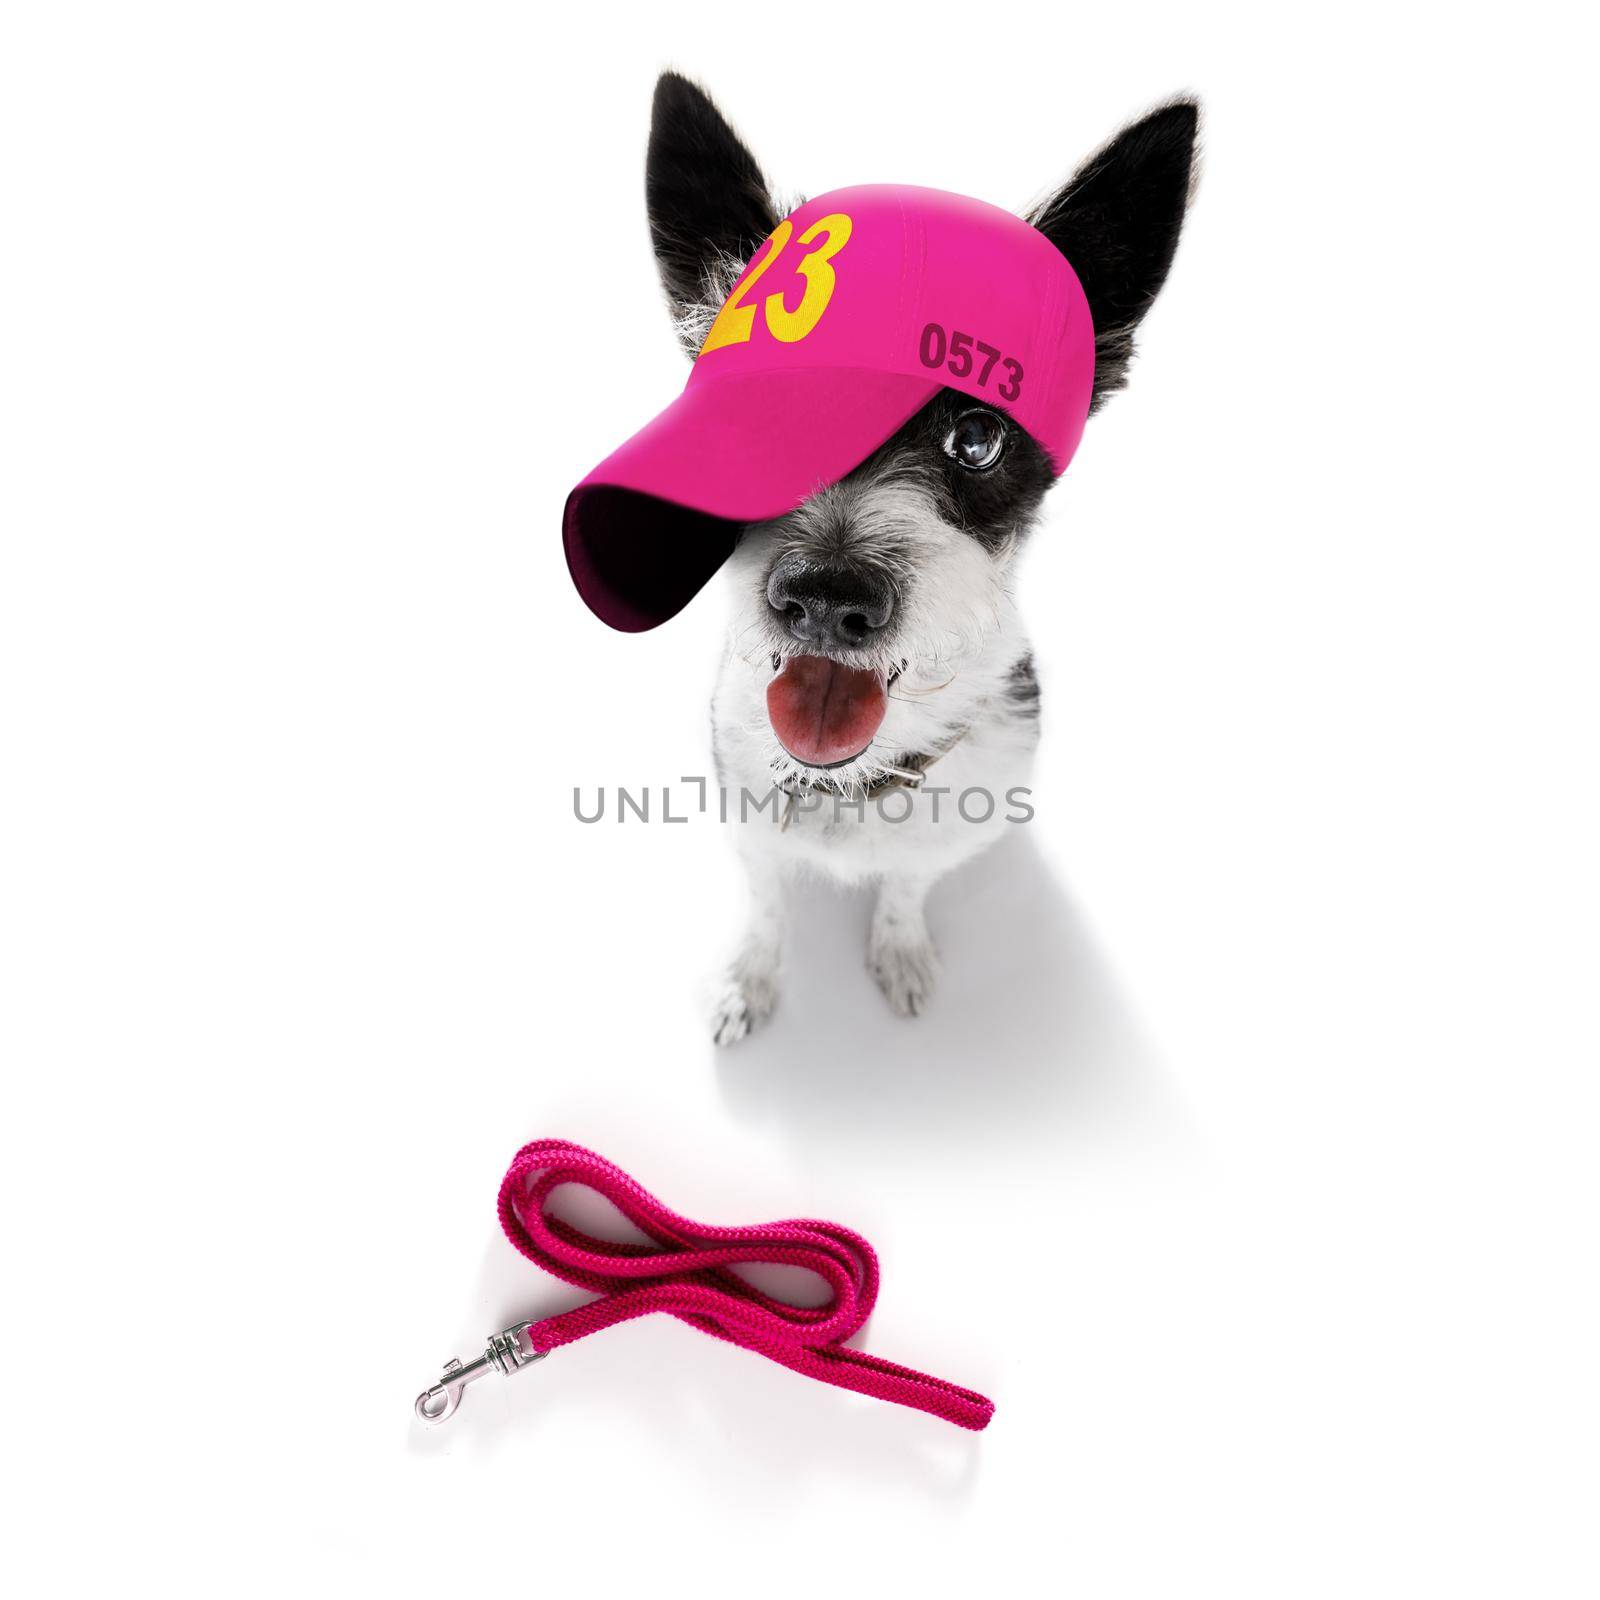 cool casual look poodle dog wearing a baseball cap or hat , sporty and fit , ready for a walk and leash